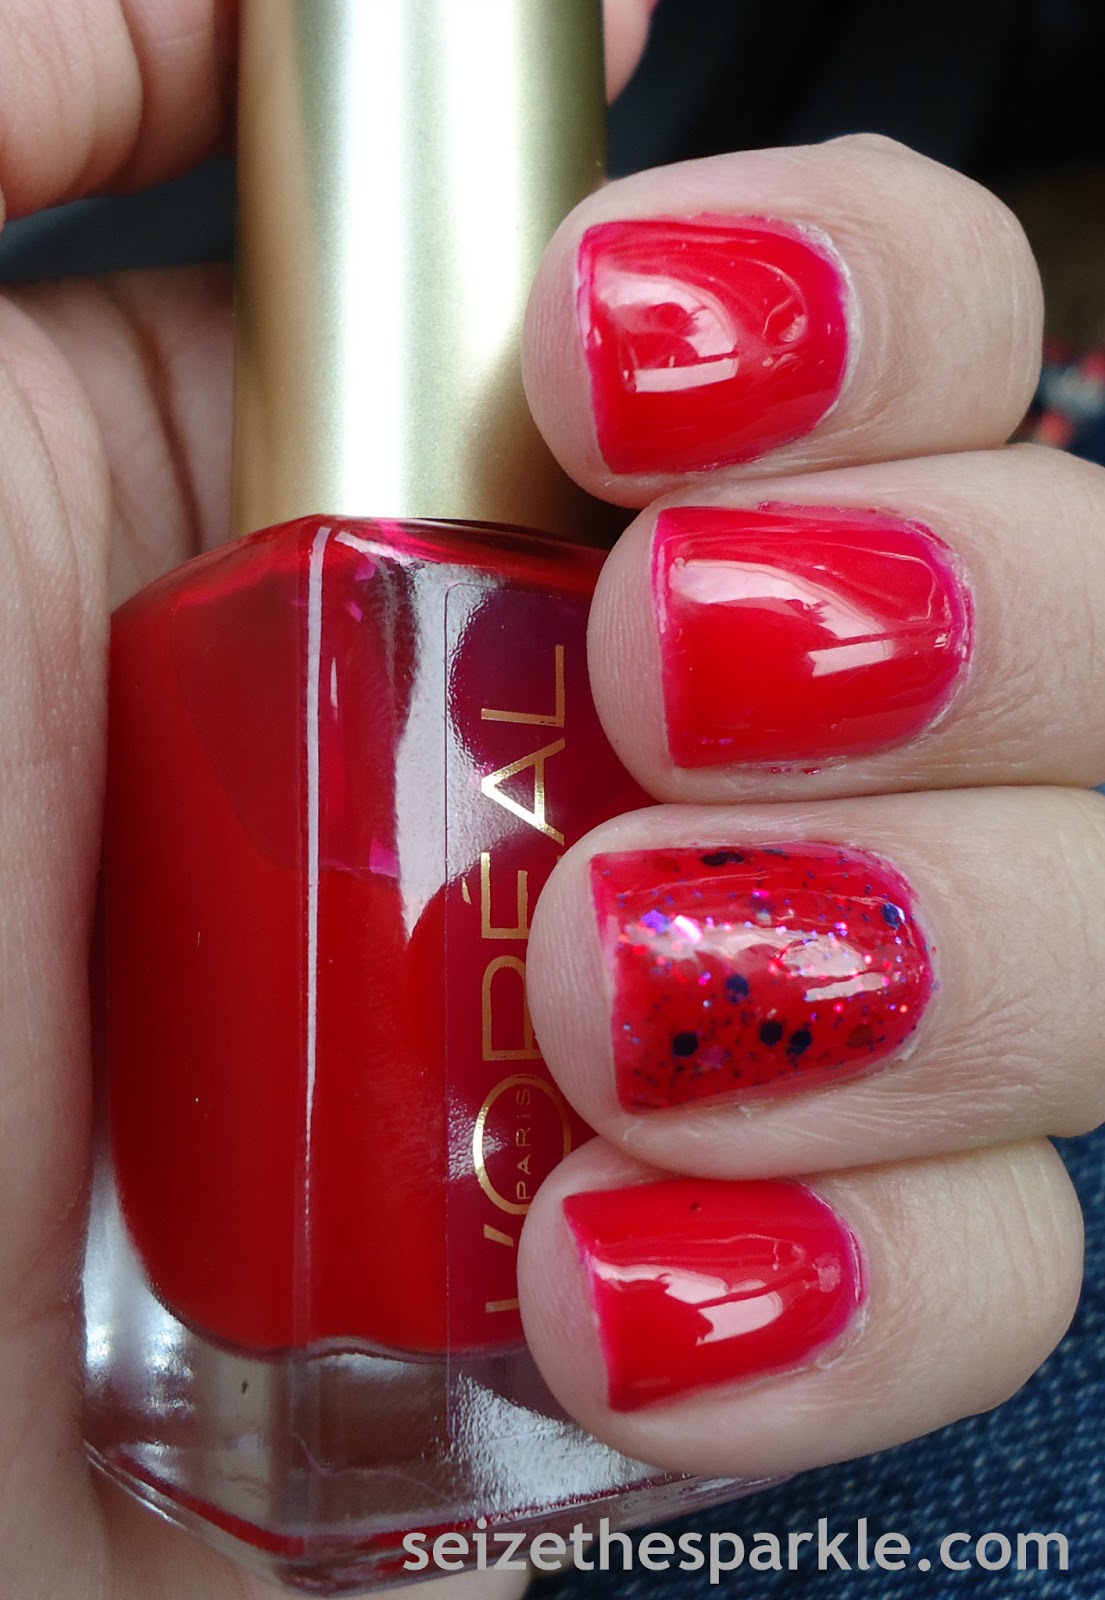 L'Oreal Jolly Lolly Accent Manicure